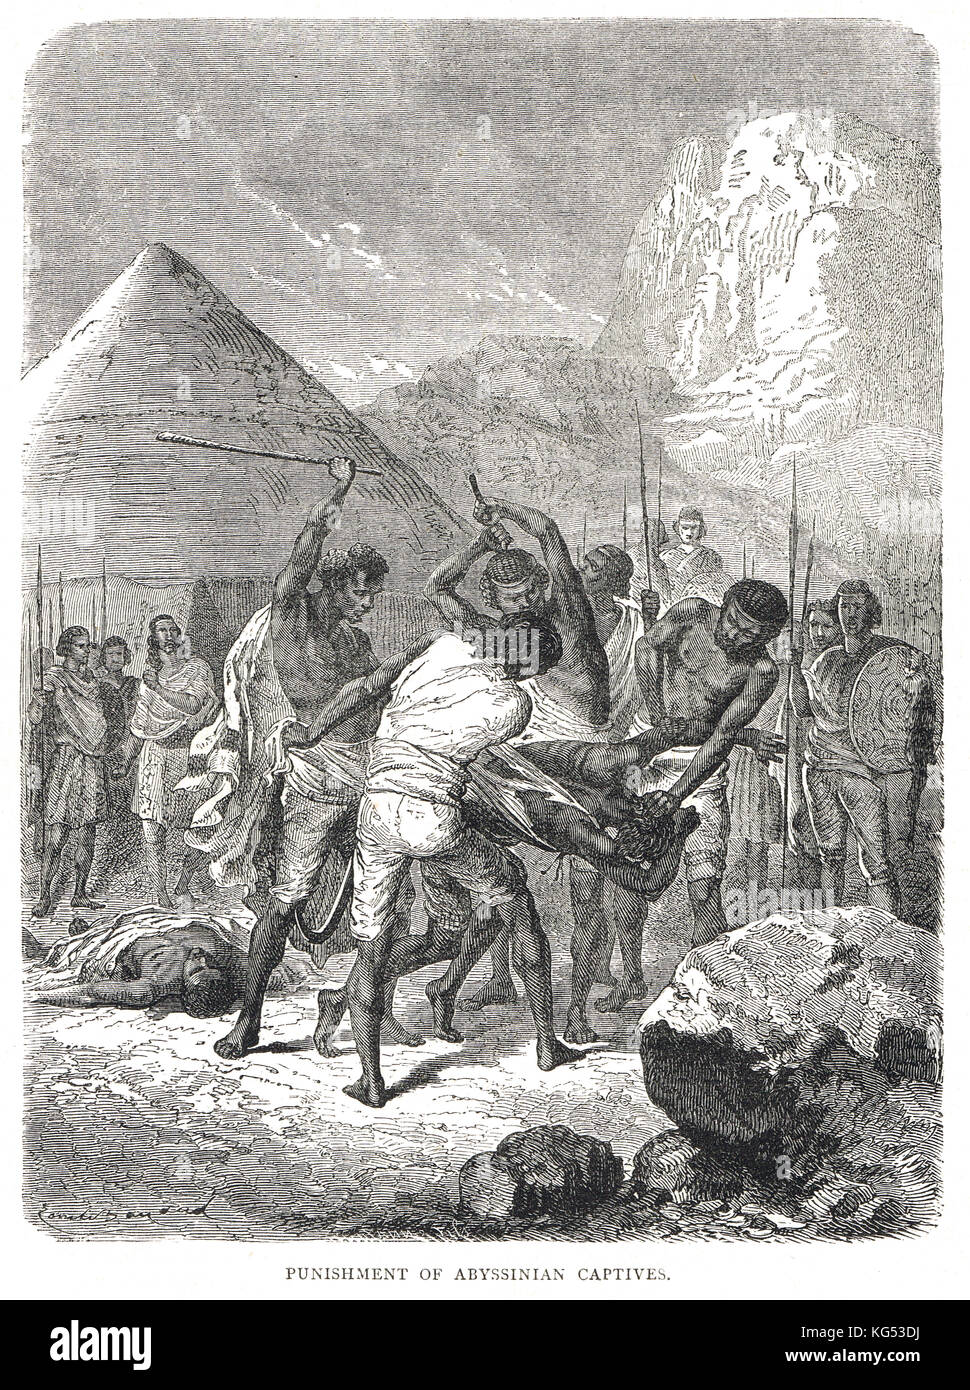 Abyssinian punishment of native hostages, April 1868, Siege of Magdala, British Expedition to Abyssinia, 1867-1868 Stock Photo